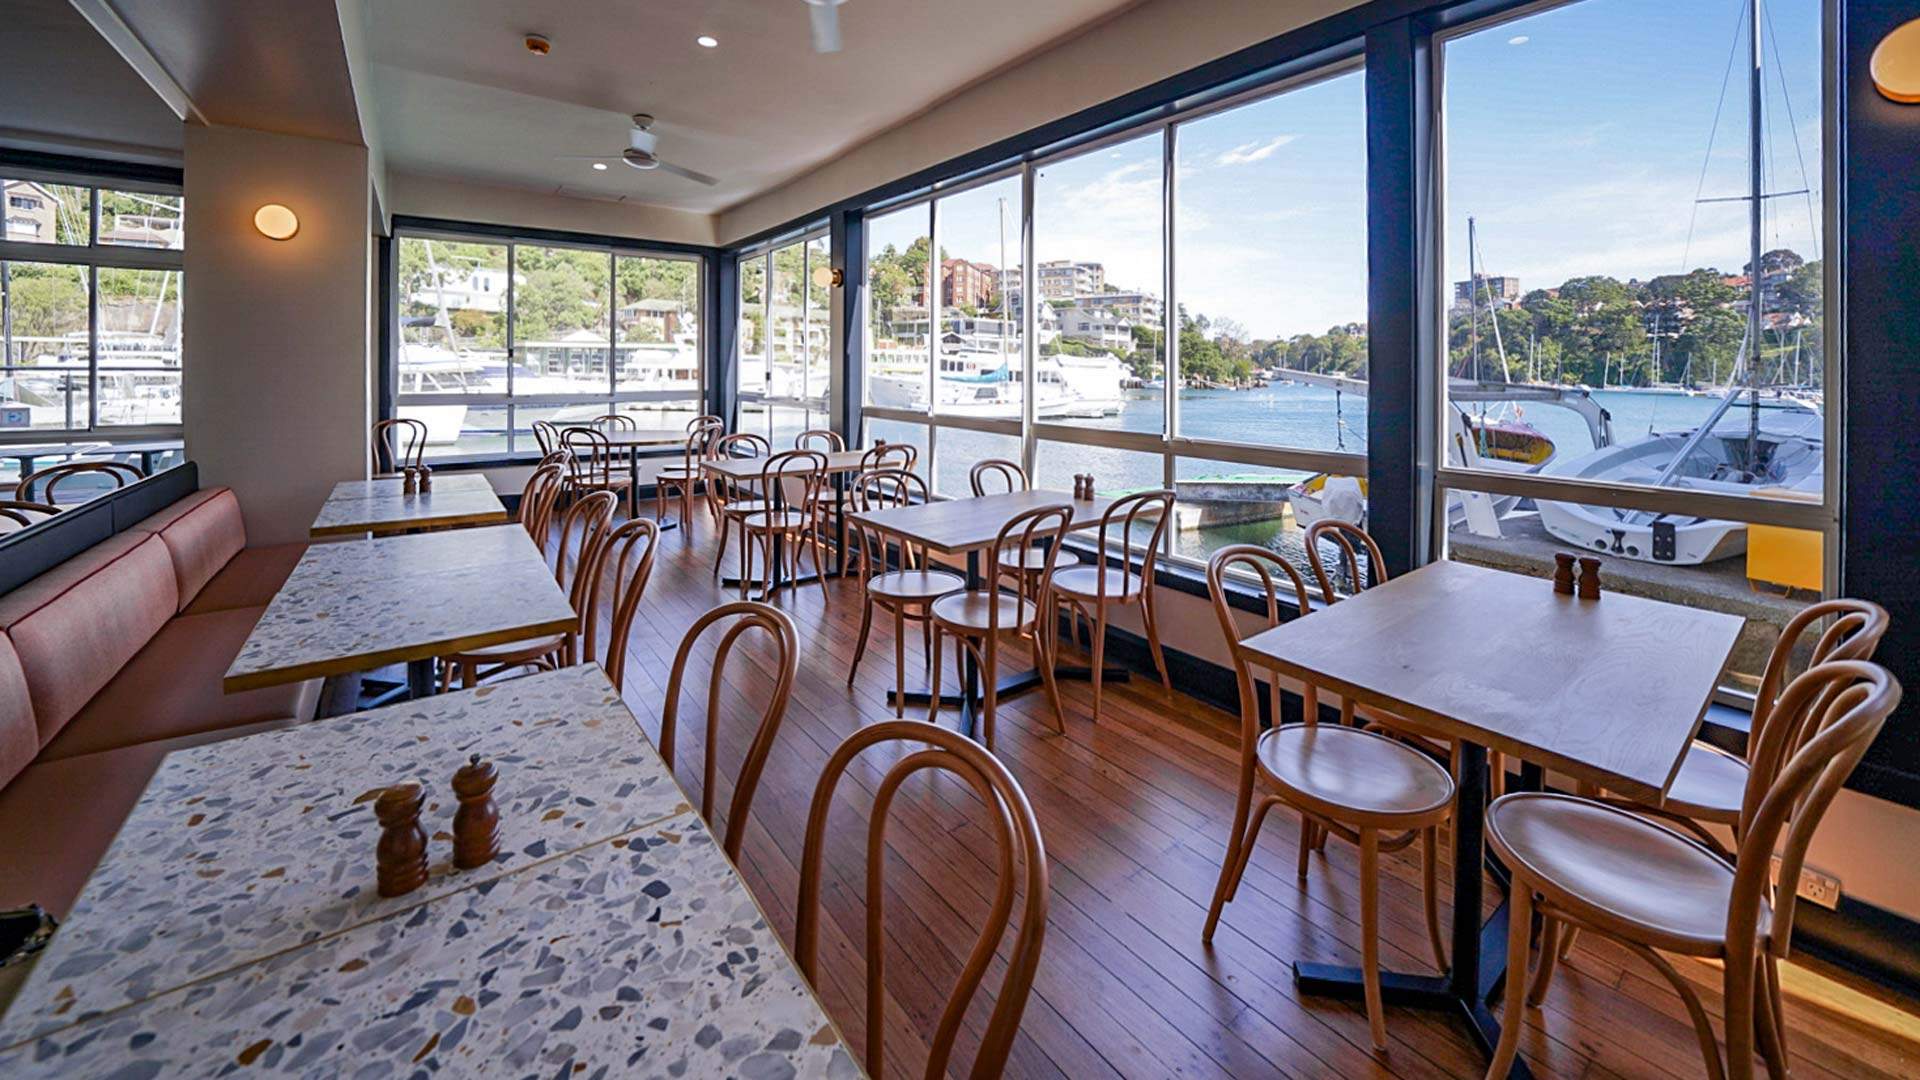 This Century-Old Lower North Shore Club Has Reopened with a New Cafe and Bar